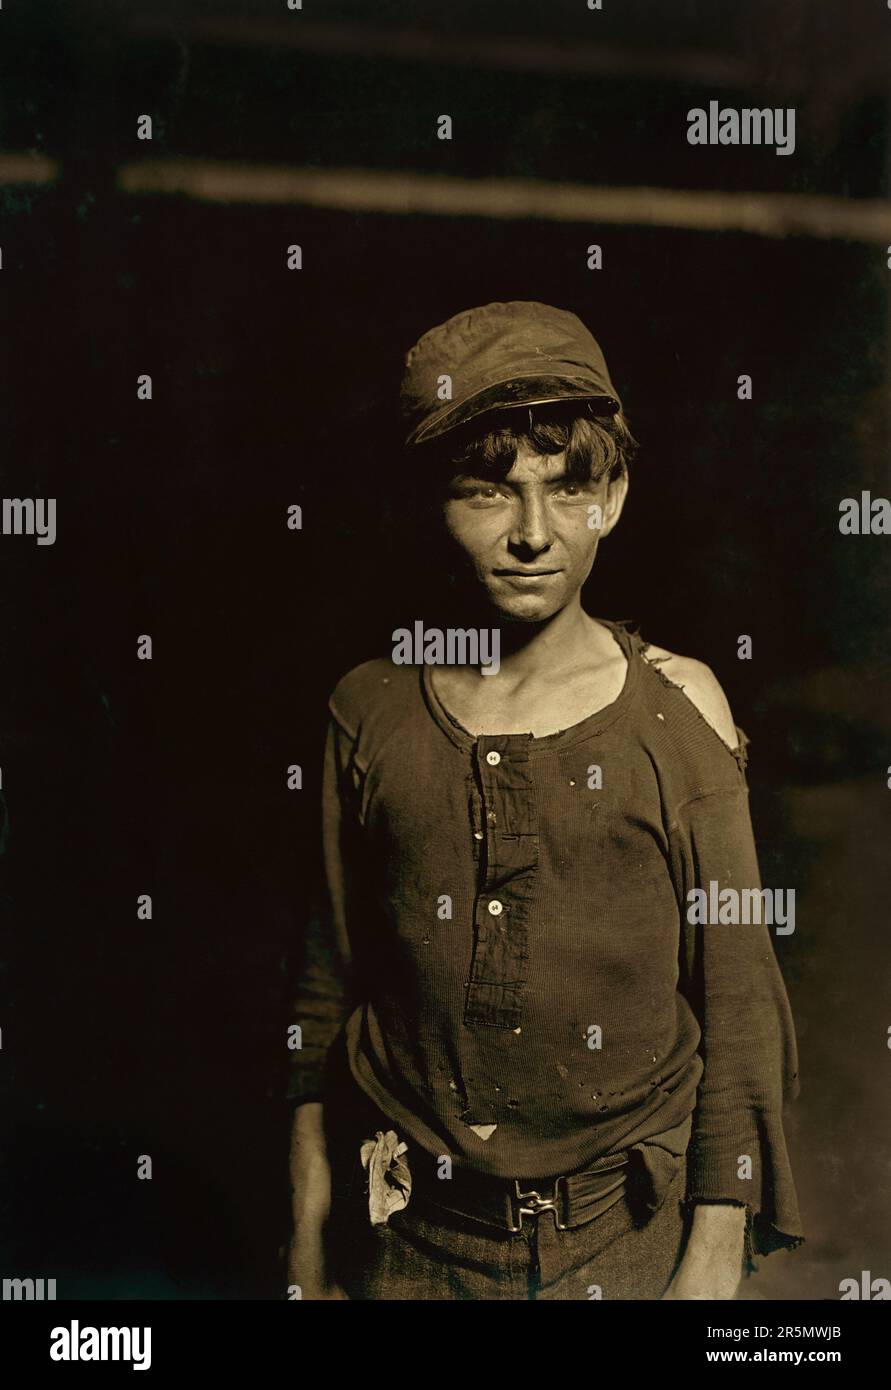 Young glassworker, night shift, 1am, Indiana, USA, Lewis Wickes Hine, August 1908 Stock Photo